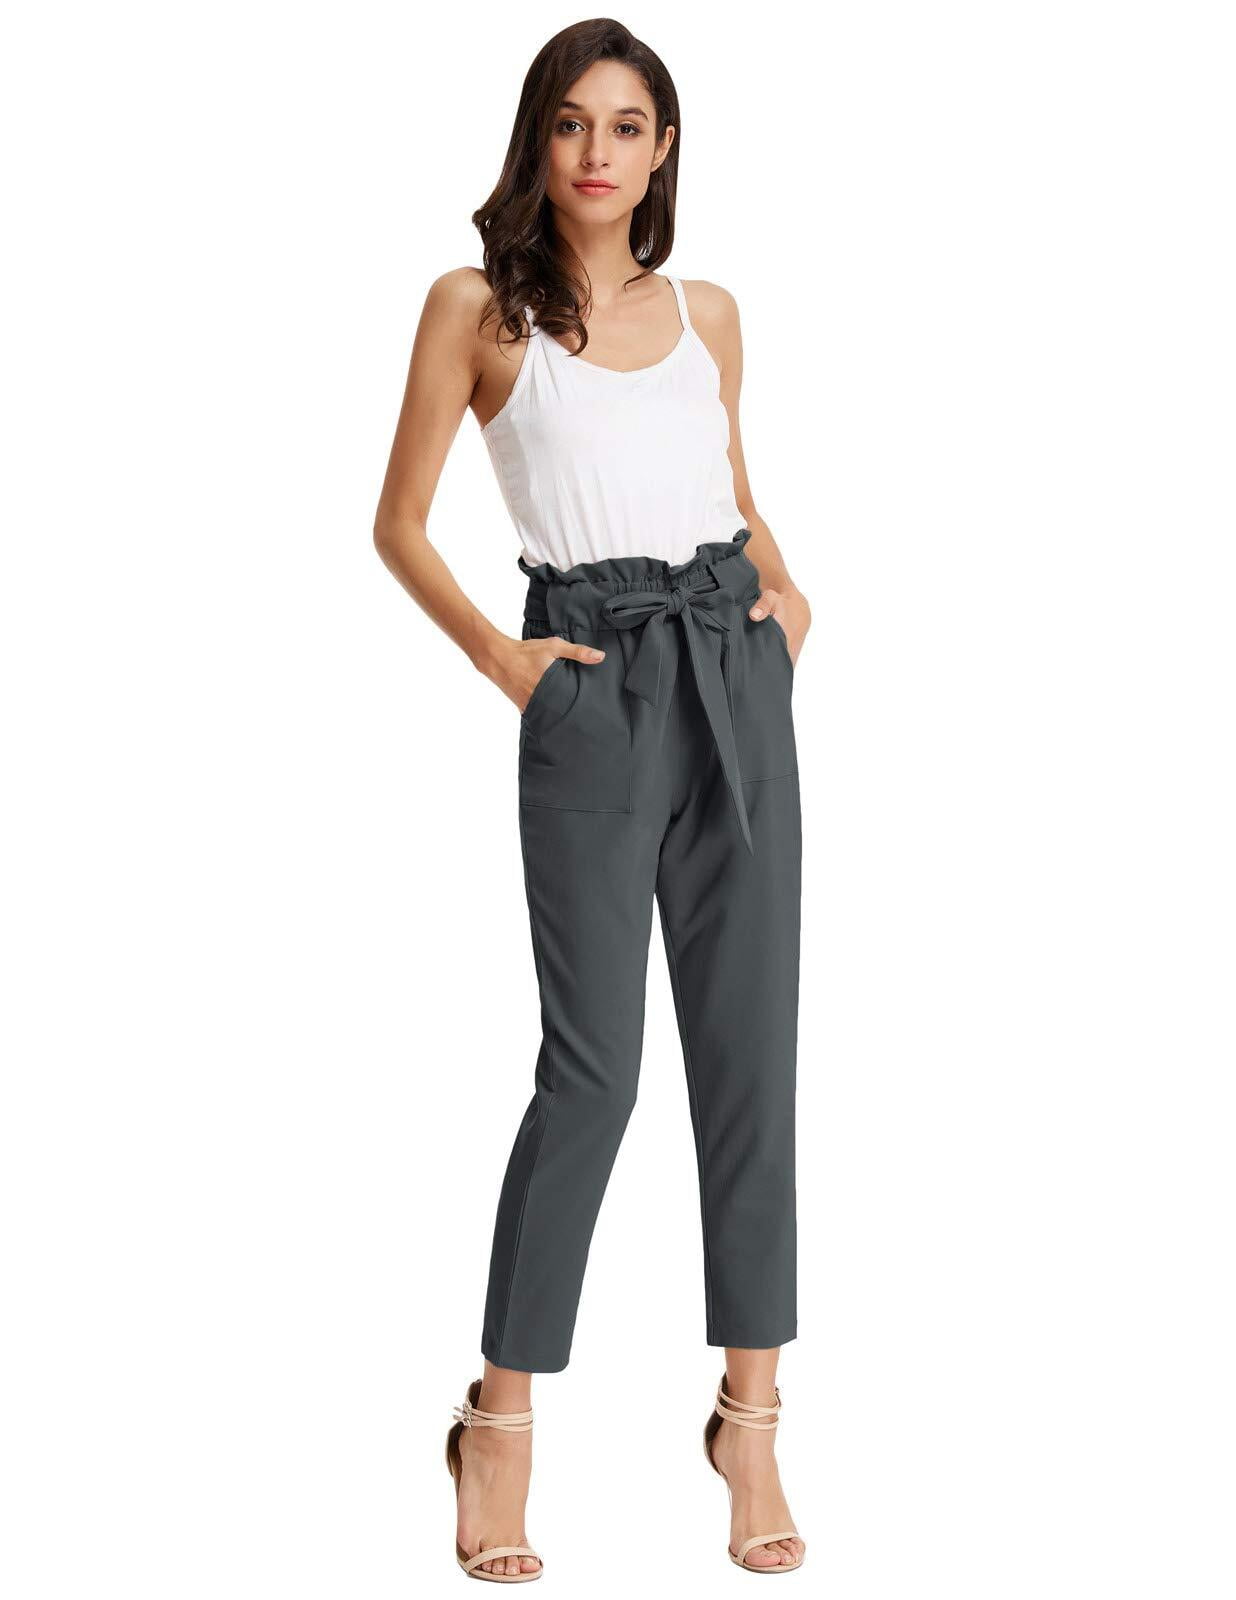 GlorySunshine Womens Cropped Paper Bag Pants Casual Trouser Elastic Waist Pants with Pockets 